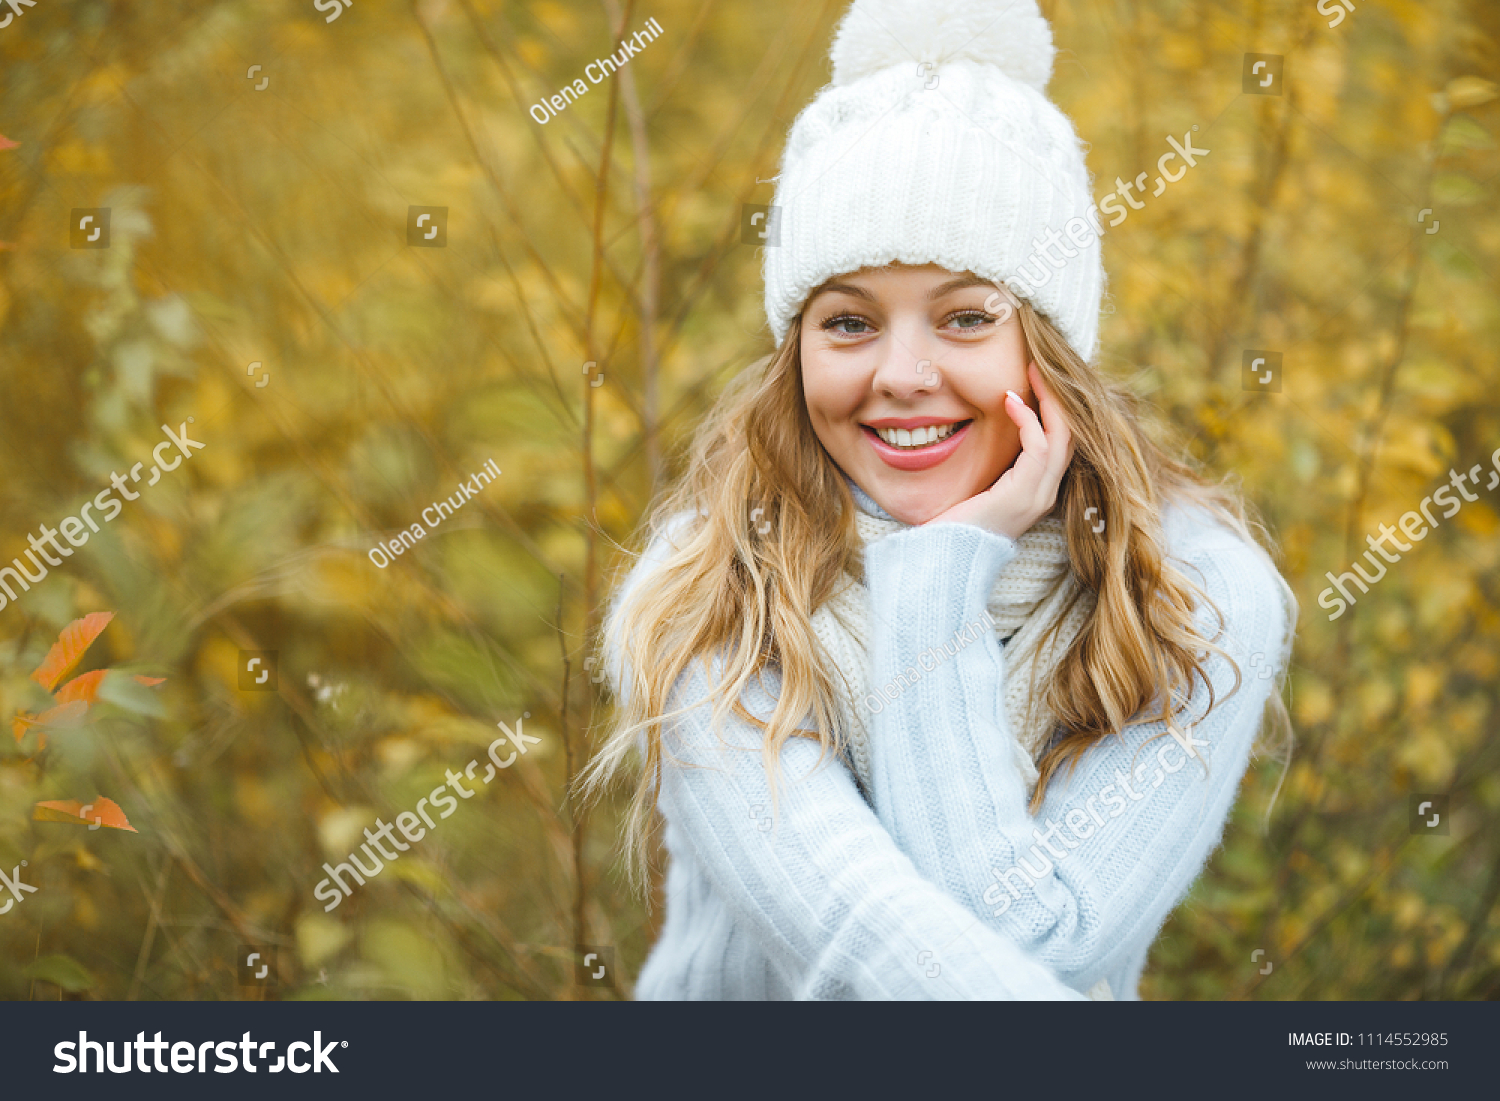 Young attractive woman in autumn colorful background #1114552985